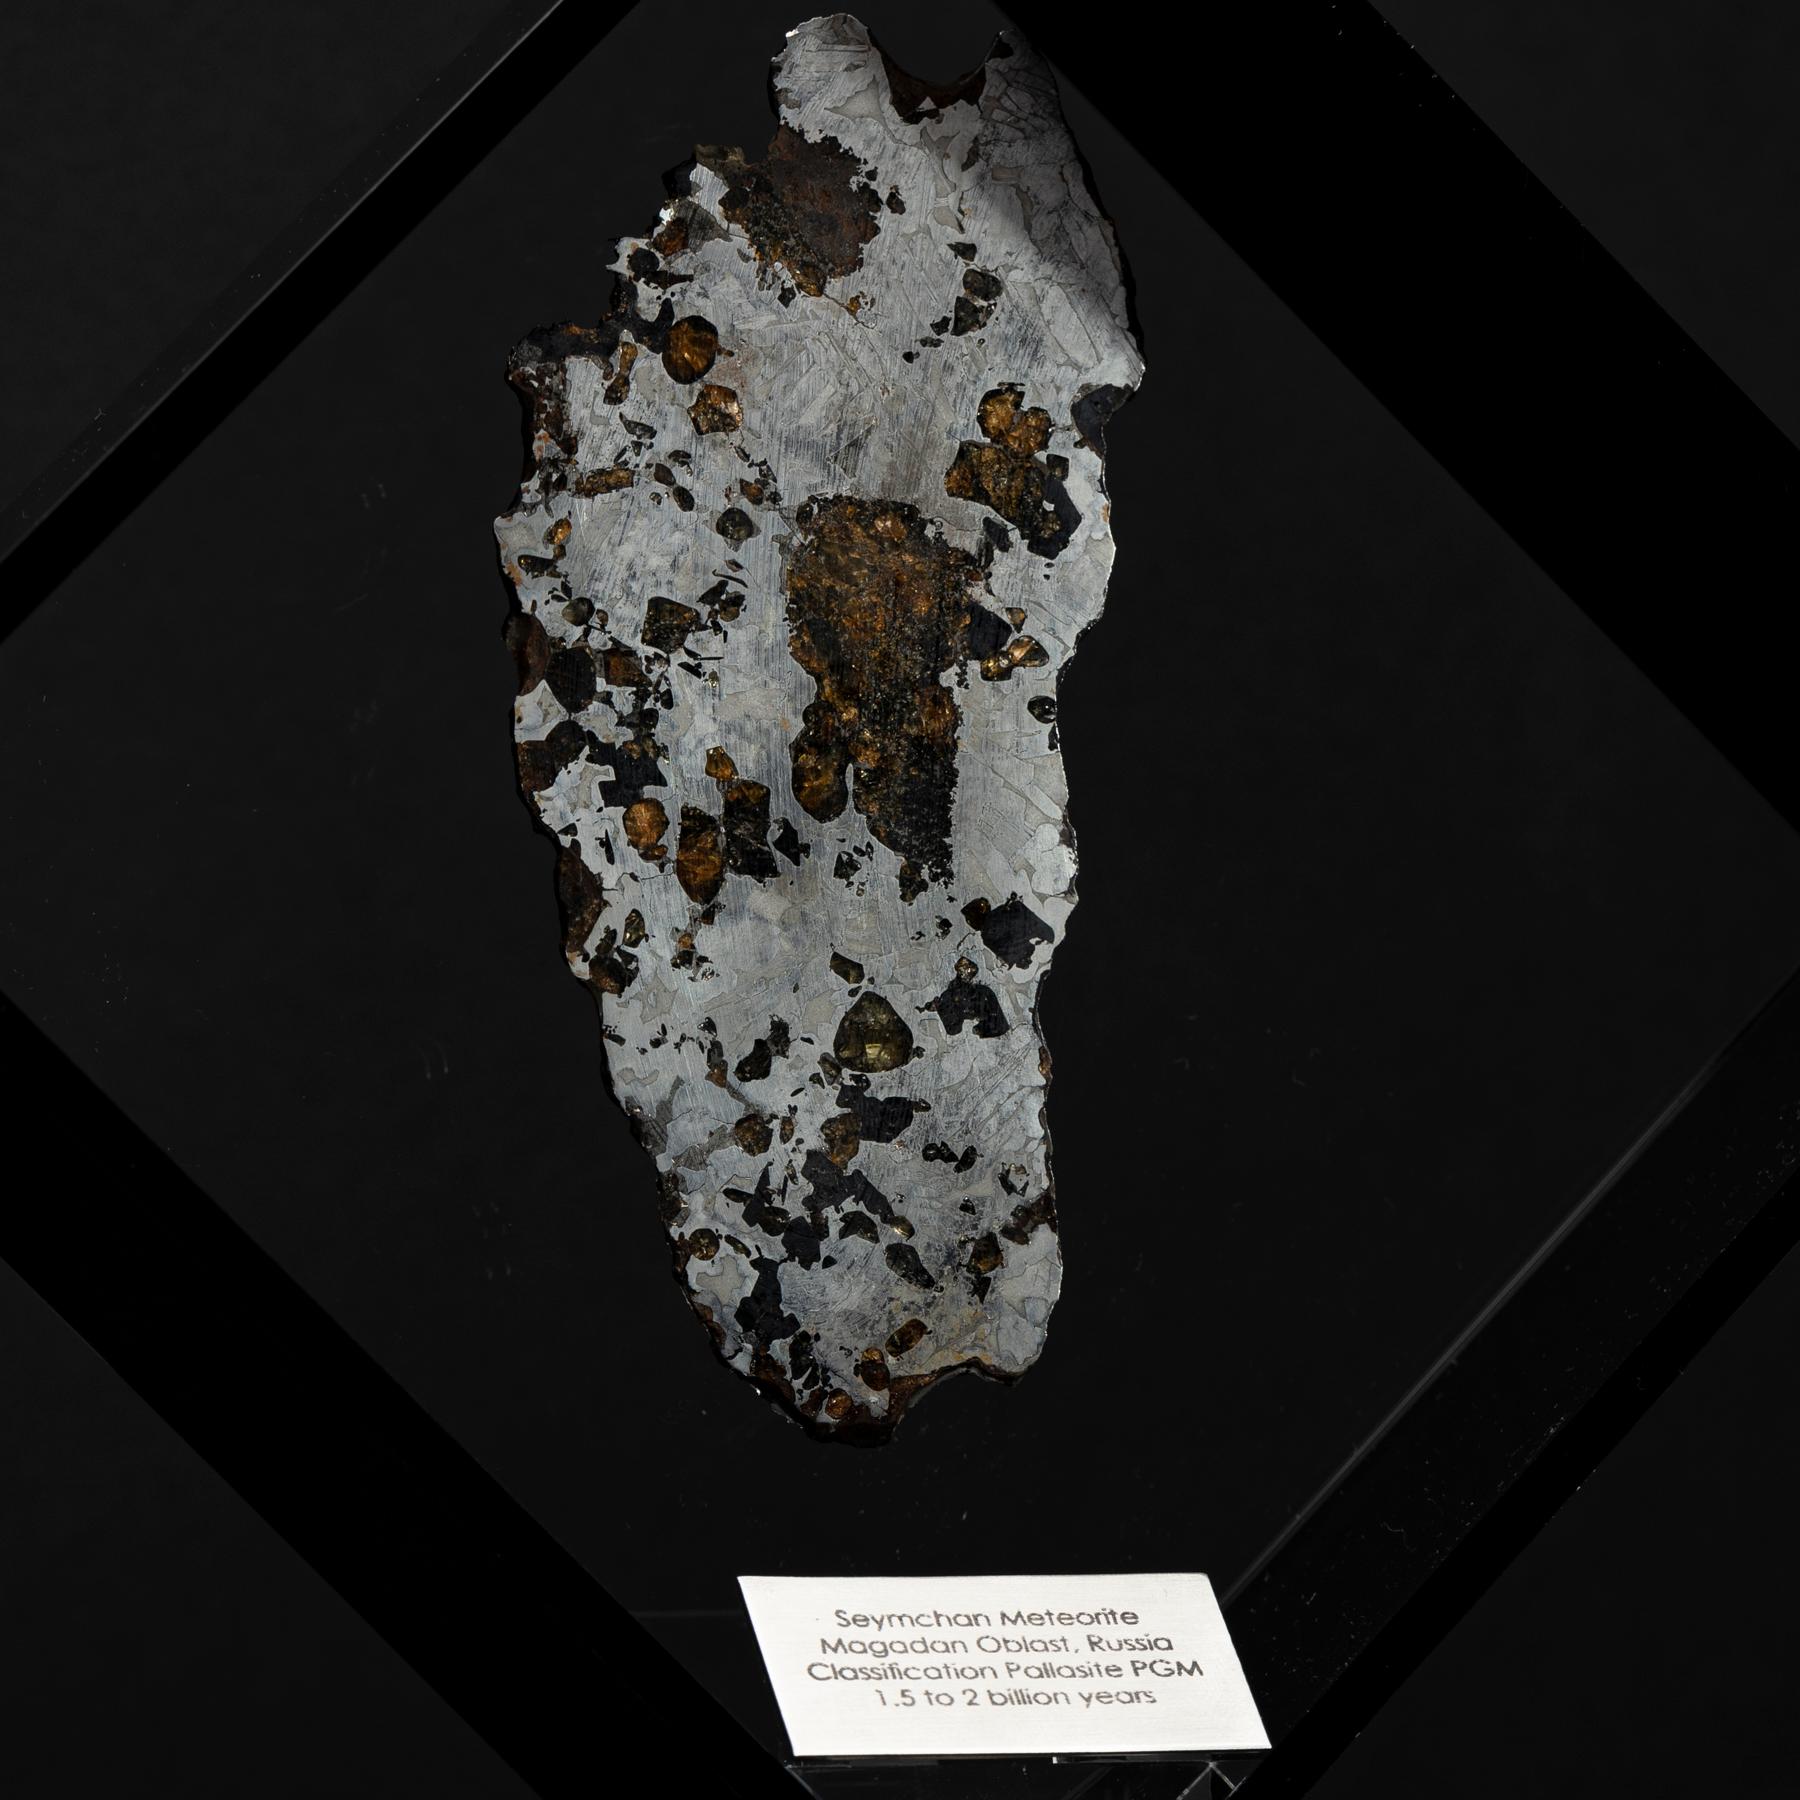 Seymchan with Olivine Meteorite from Russia in a Custom Acrylic Display 1